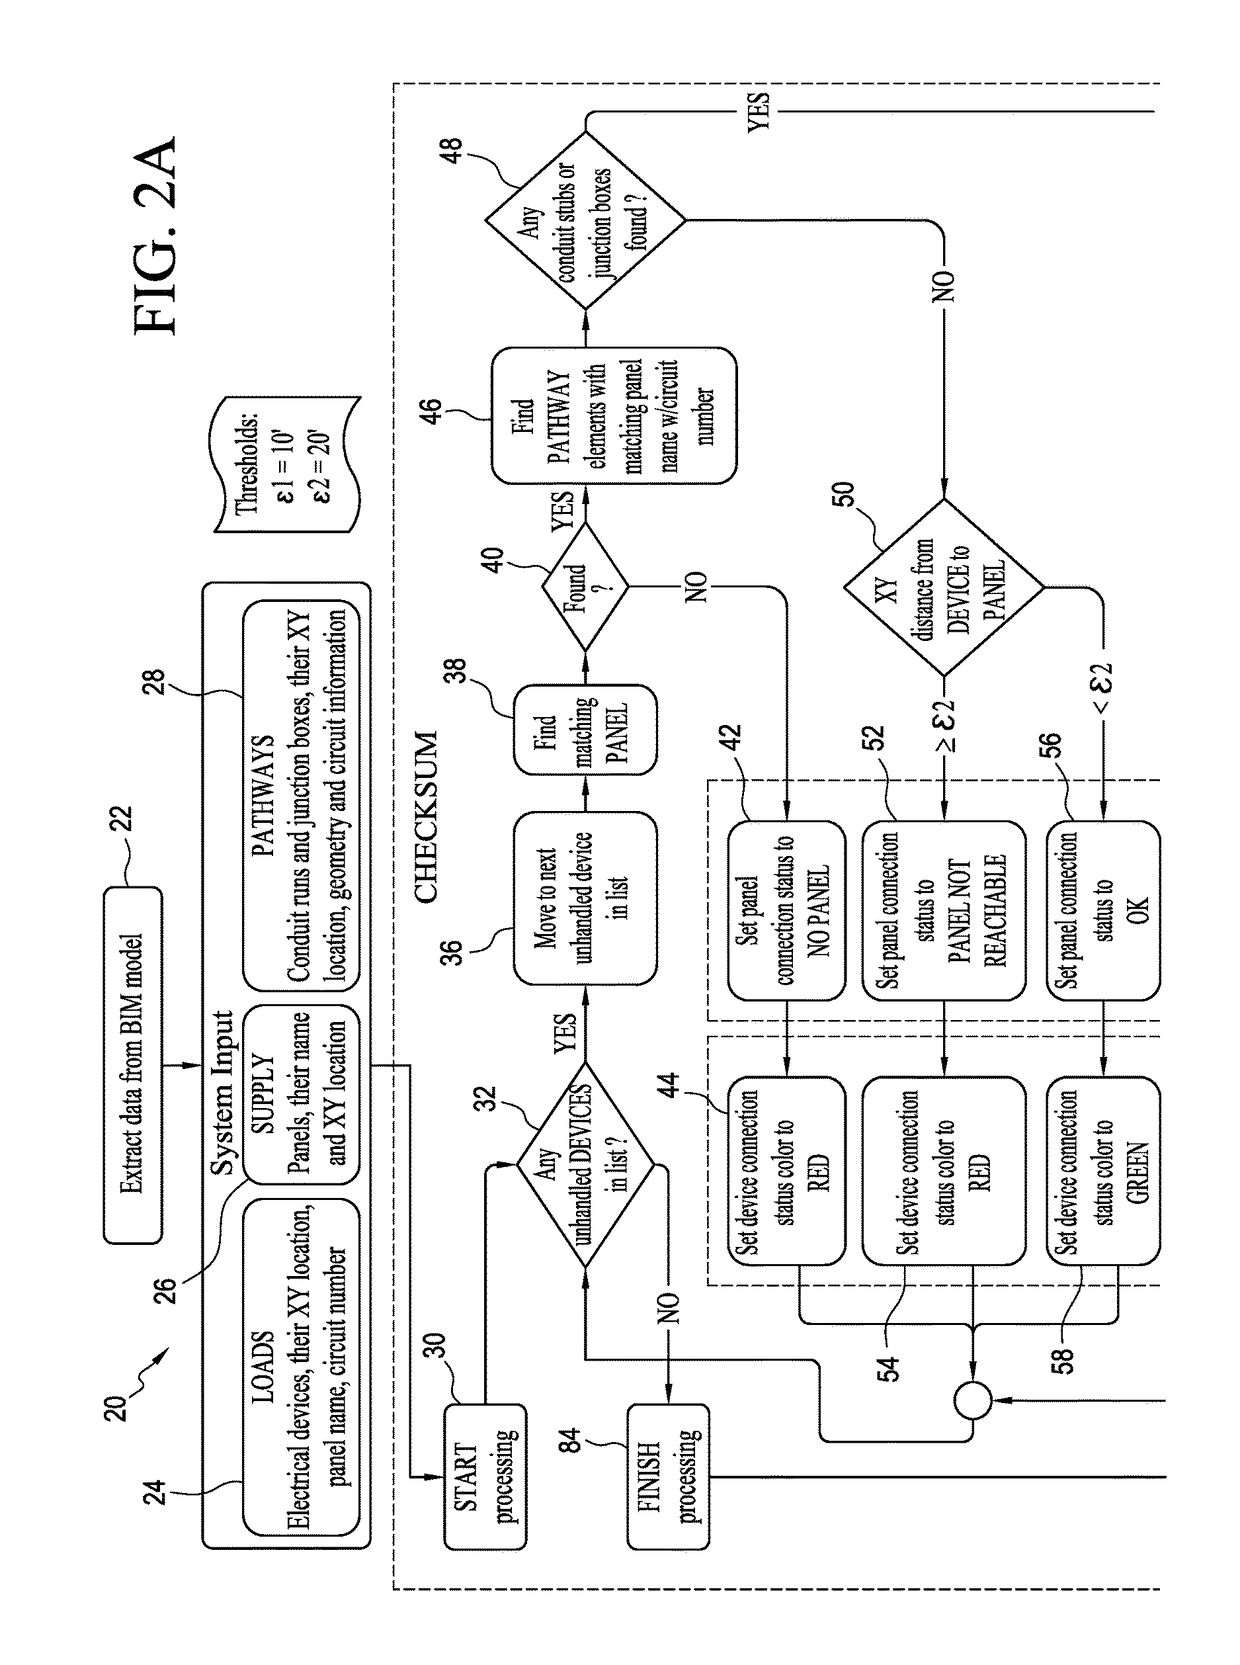 System and method for testing the validity of bim-designed electrical wiring pathways